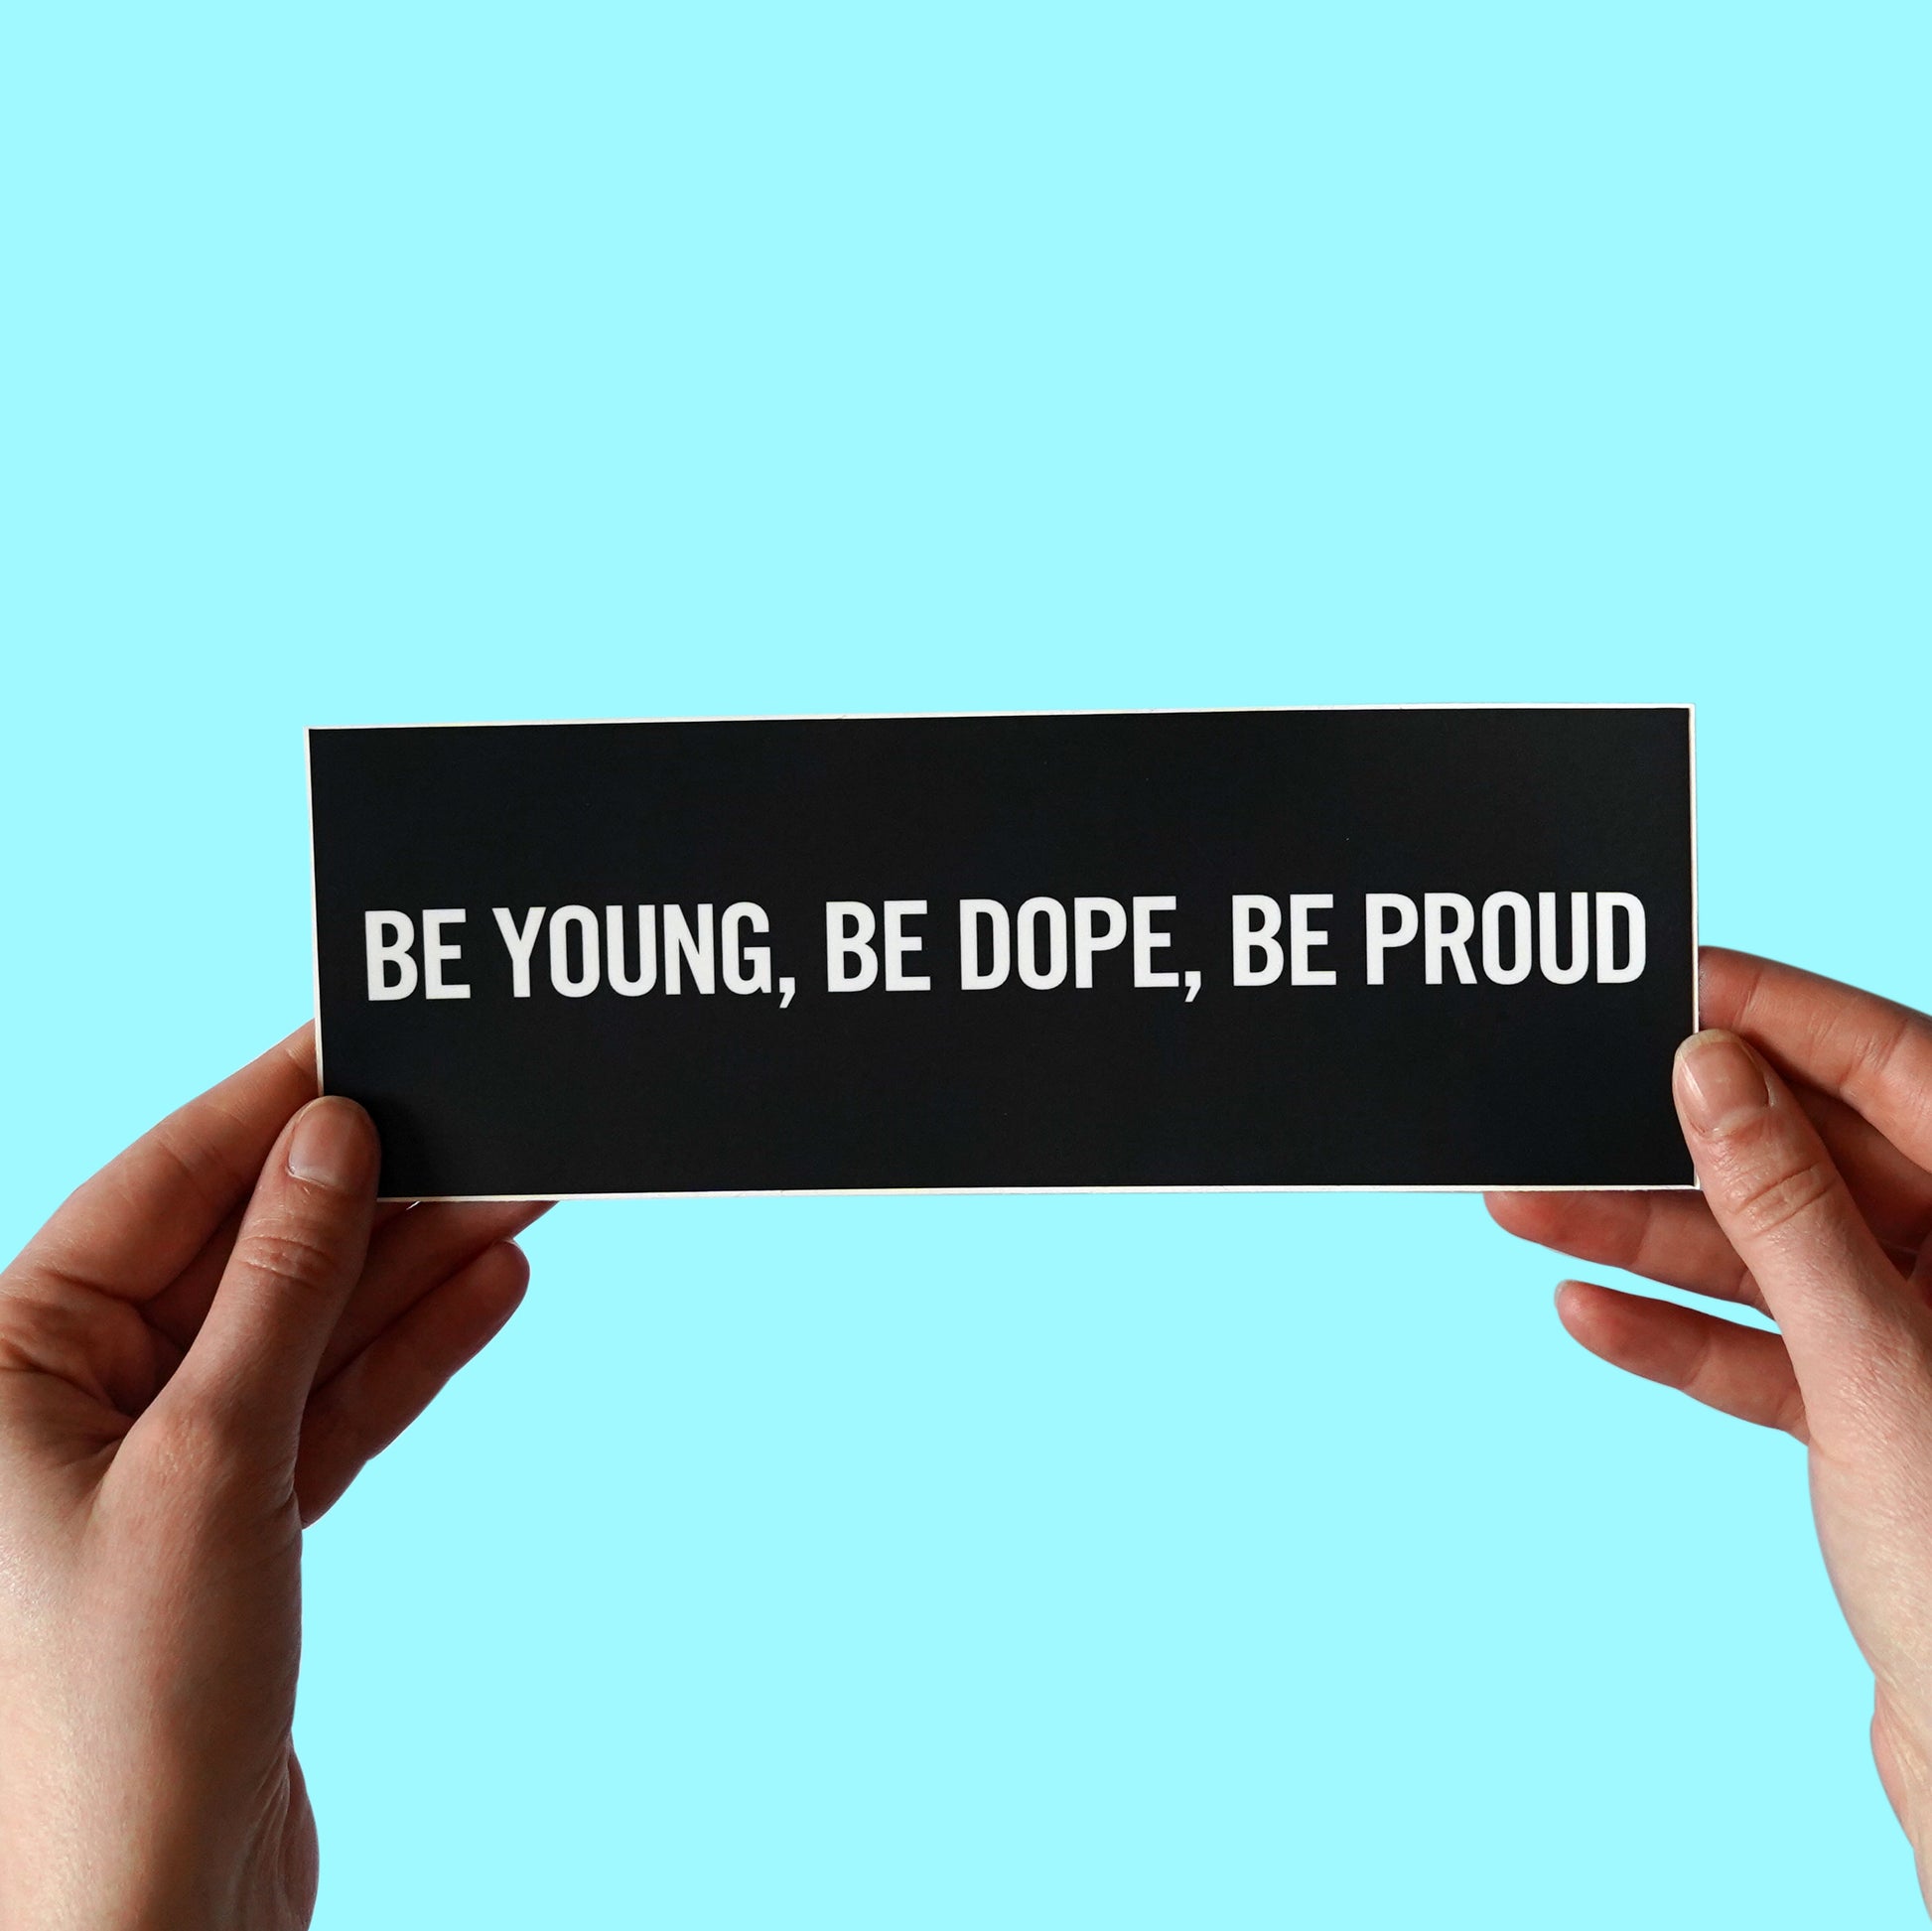 Lana Del Rey "Be Young, Be Dope, Be Proud" Lyric Bumper Sticker